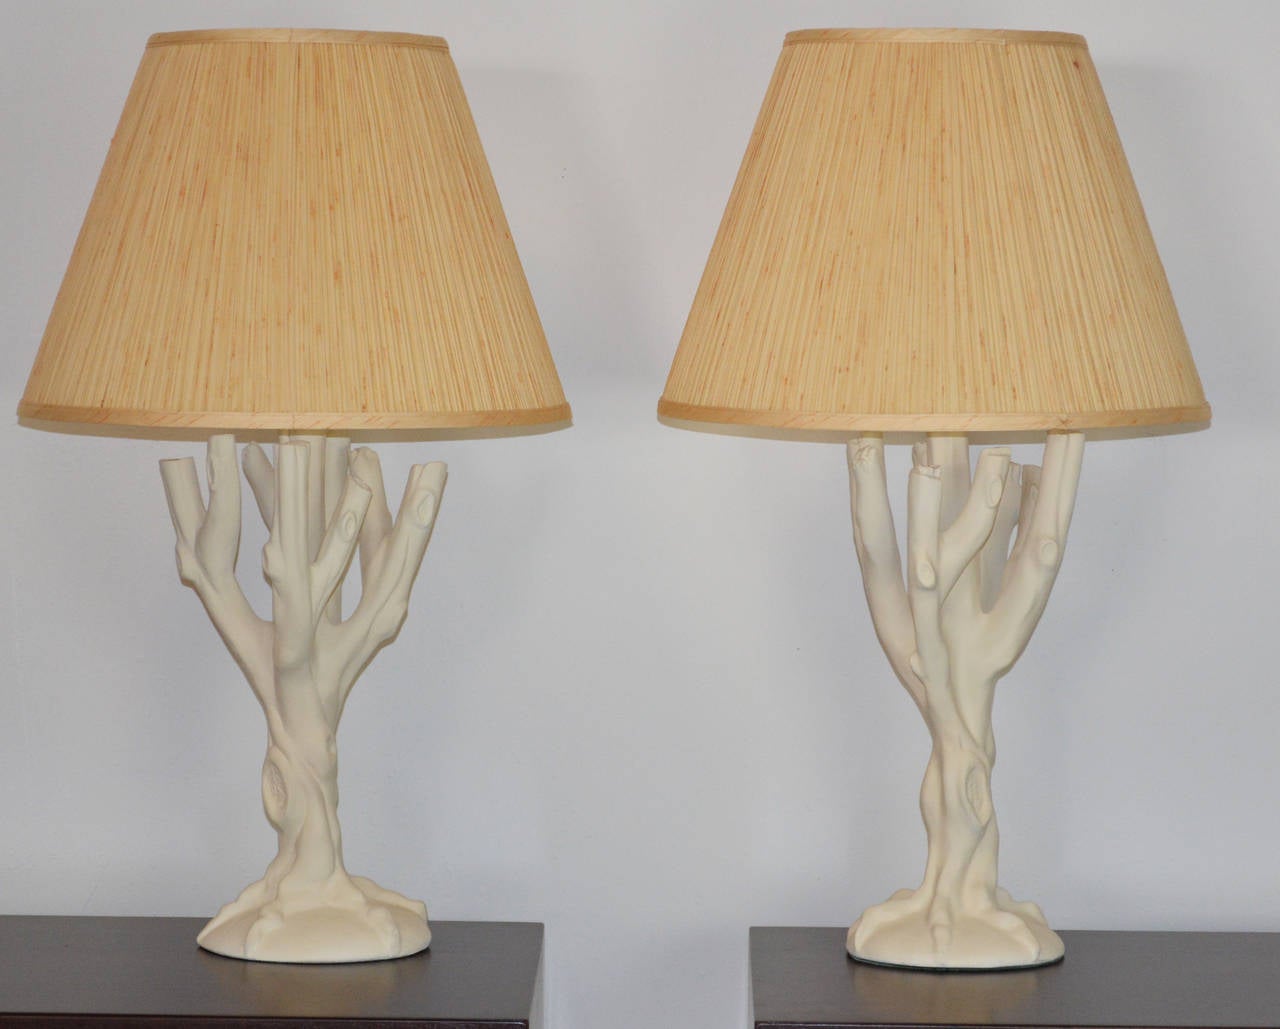 A pair of plaster tree form lamps in the style of John Dickinson. A lovely form with original finials.
Shades are for display only.